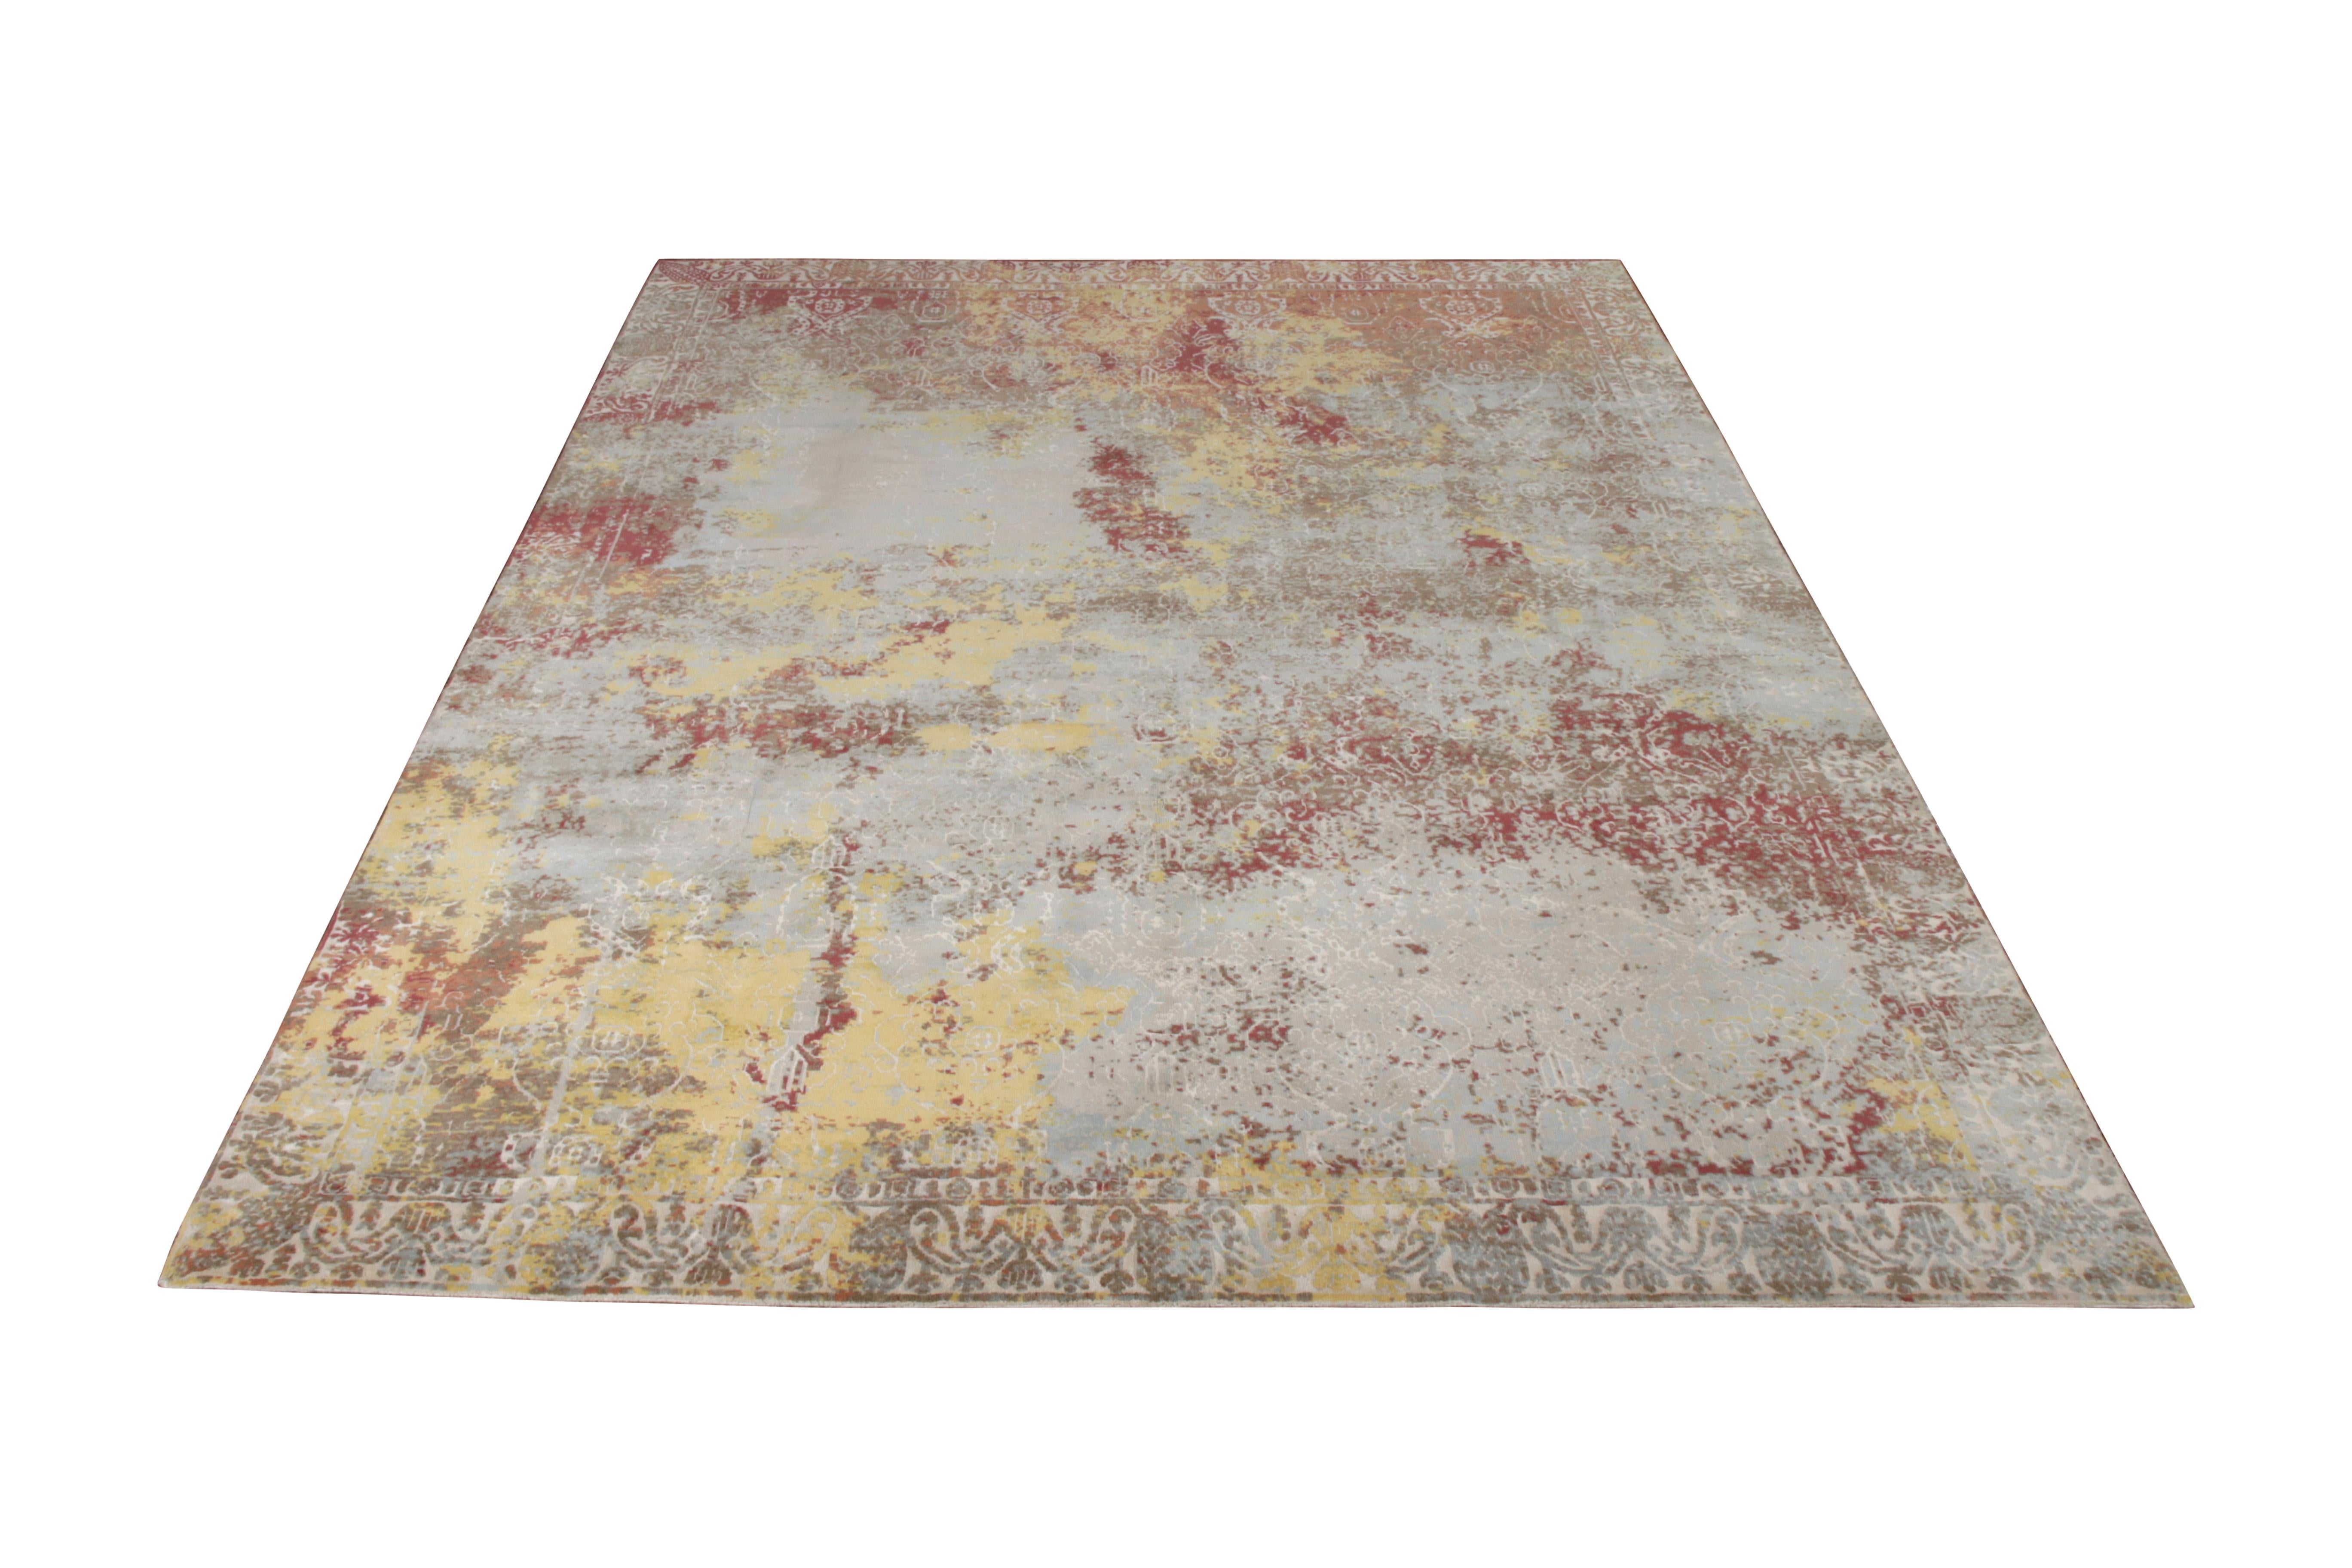 This 9×12 abstract rug is a bold new addition to Rug & Kilim’s Modern rug collection.

Hand-knotted in wool and silk, it enjoys a movement like watercolors in dominant reds and blues with gold accents therein. The silk’s natural sheen further lends